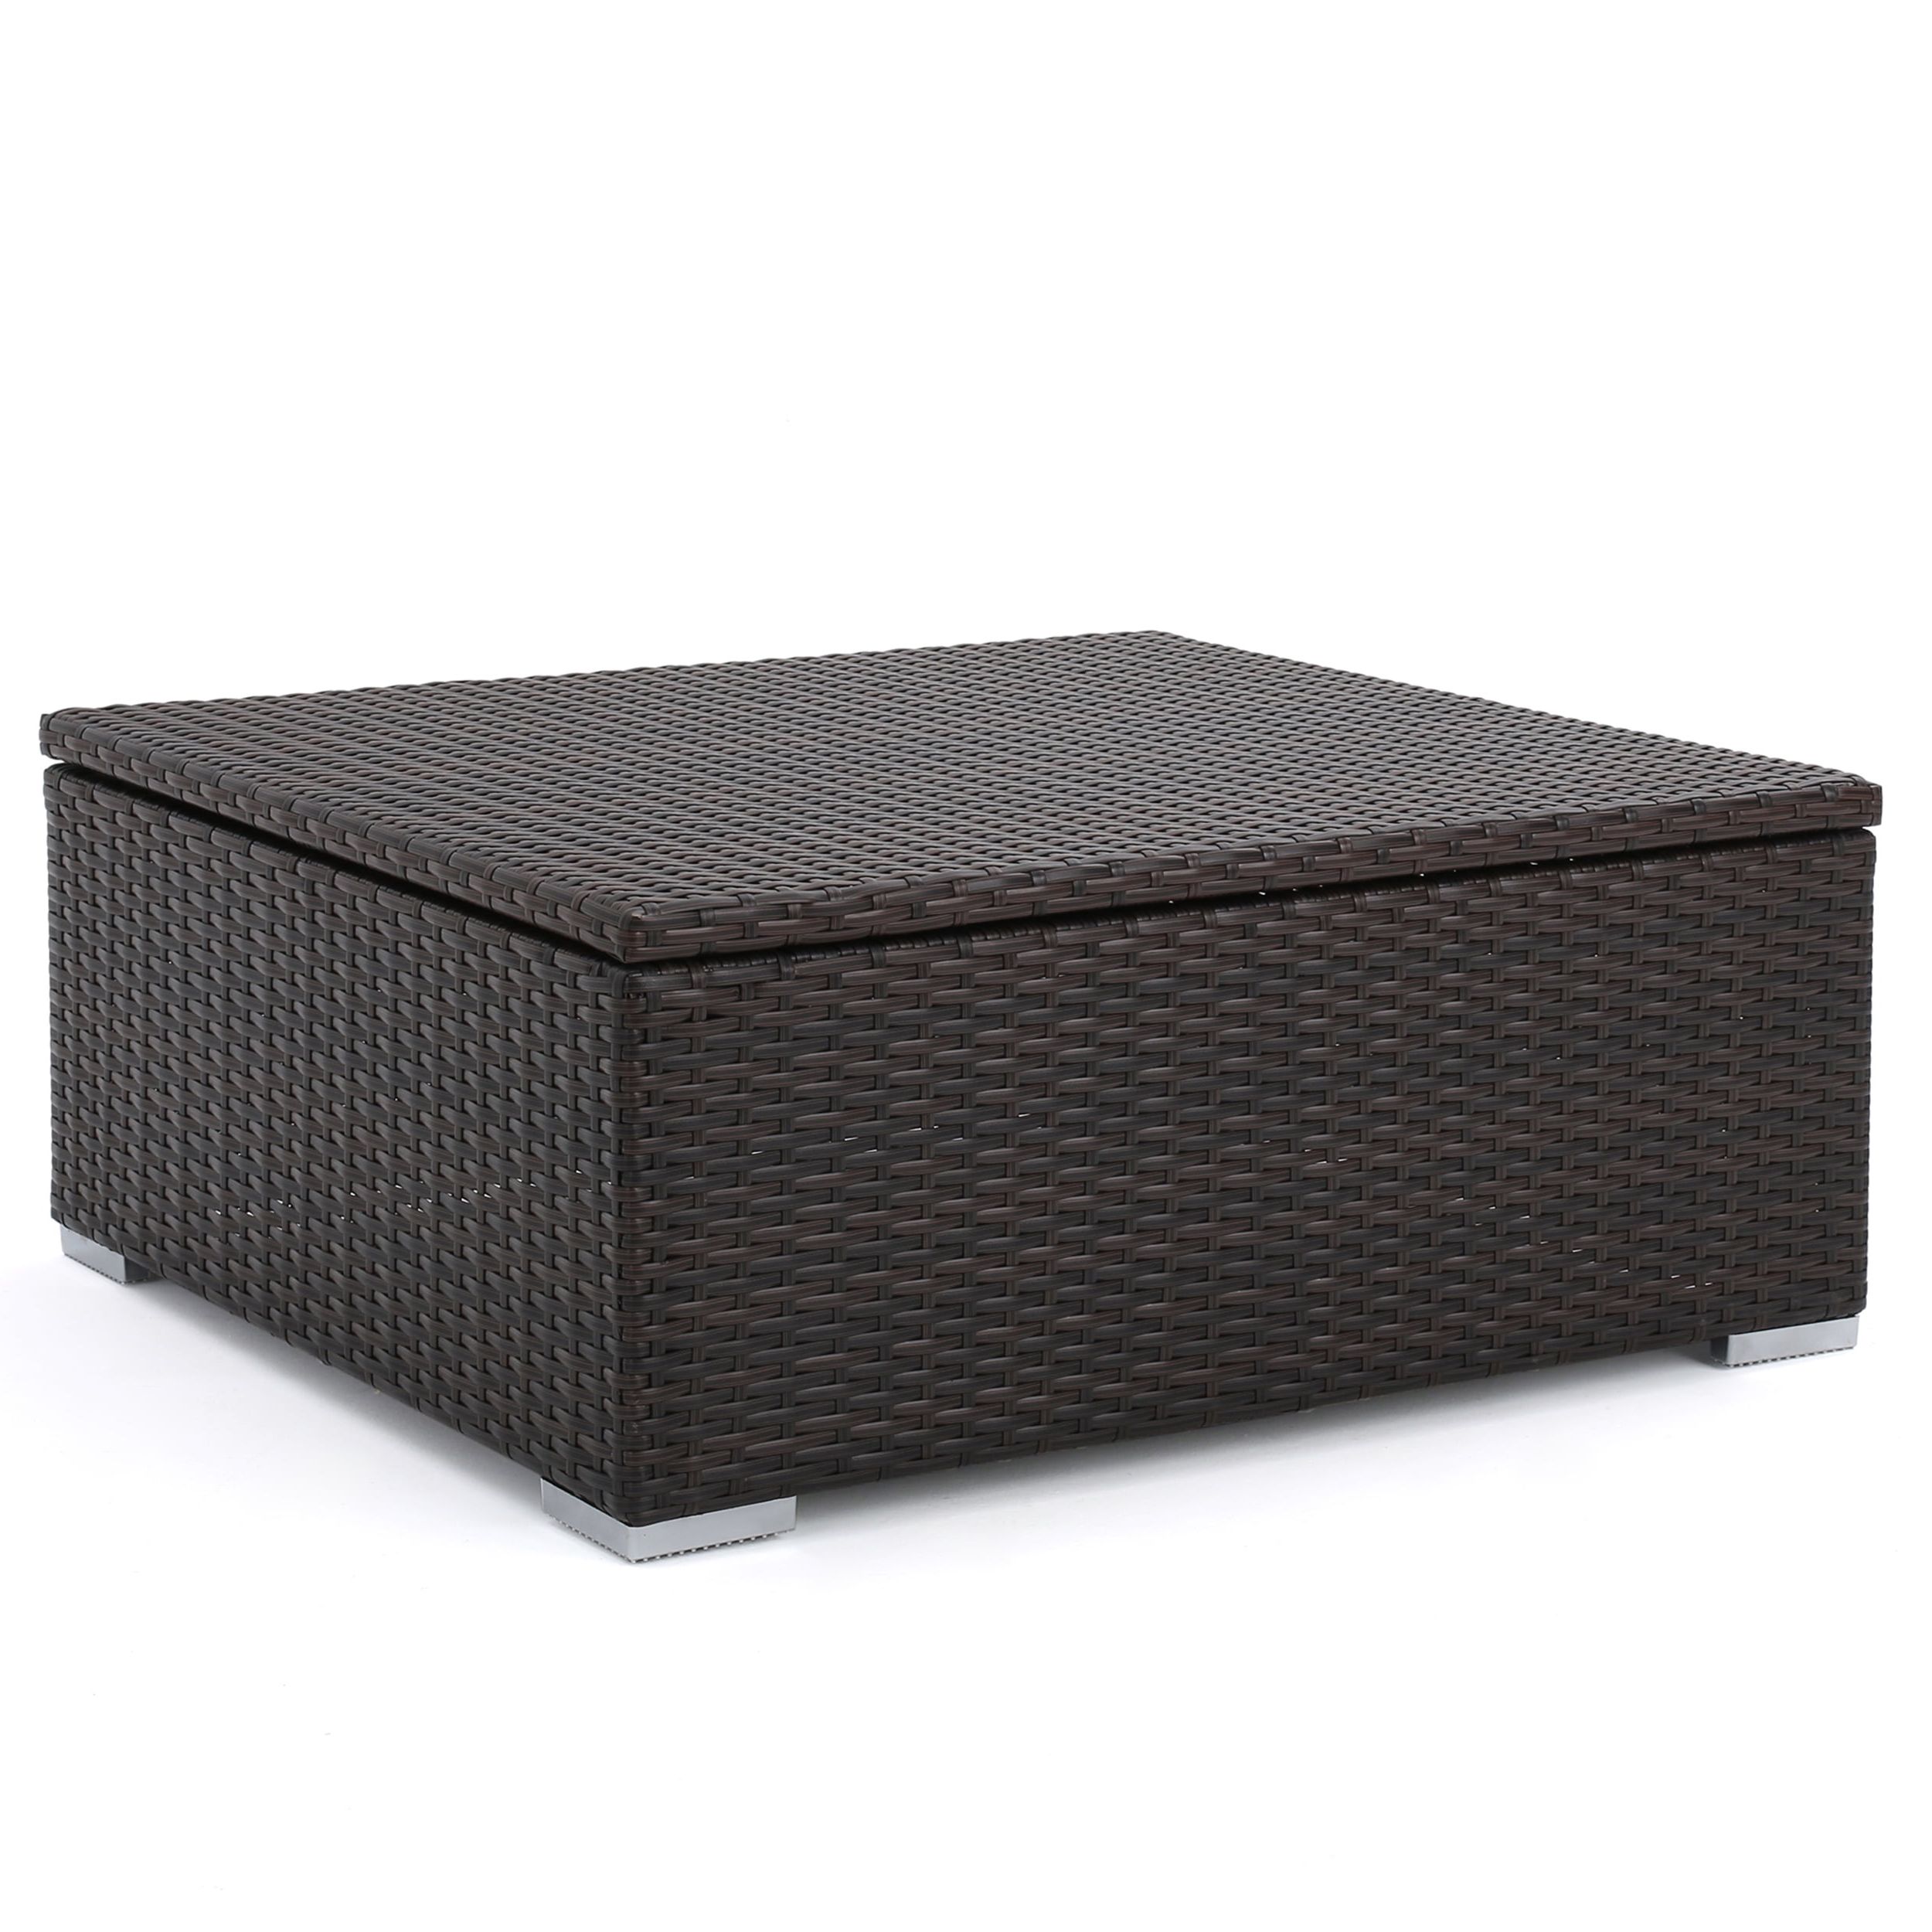 Best And Newest Costa Mesa Outdoor Wicker Coffee Table With Storage, Multibrown Throughout Waterproof Coffee Tables (View 4 of 15)